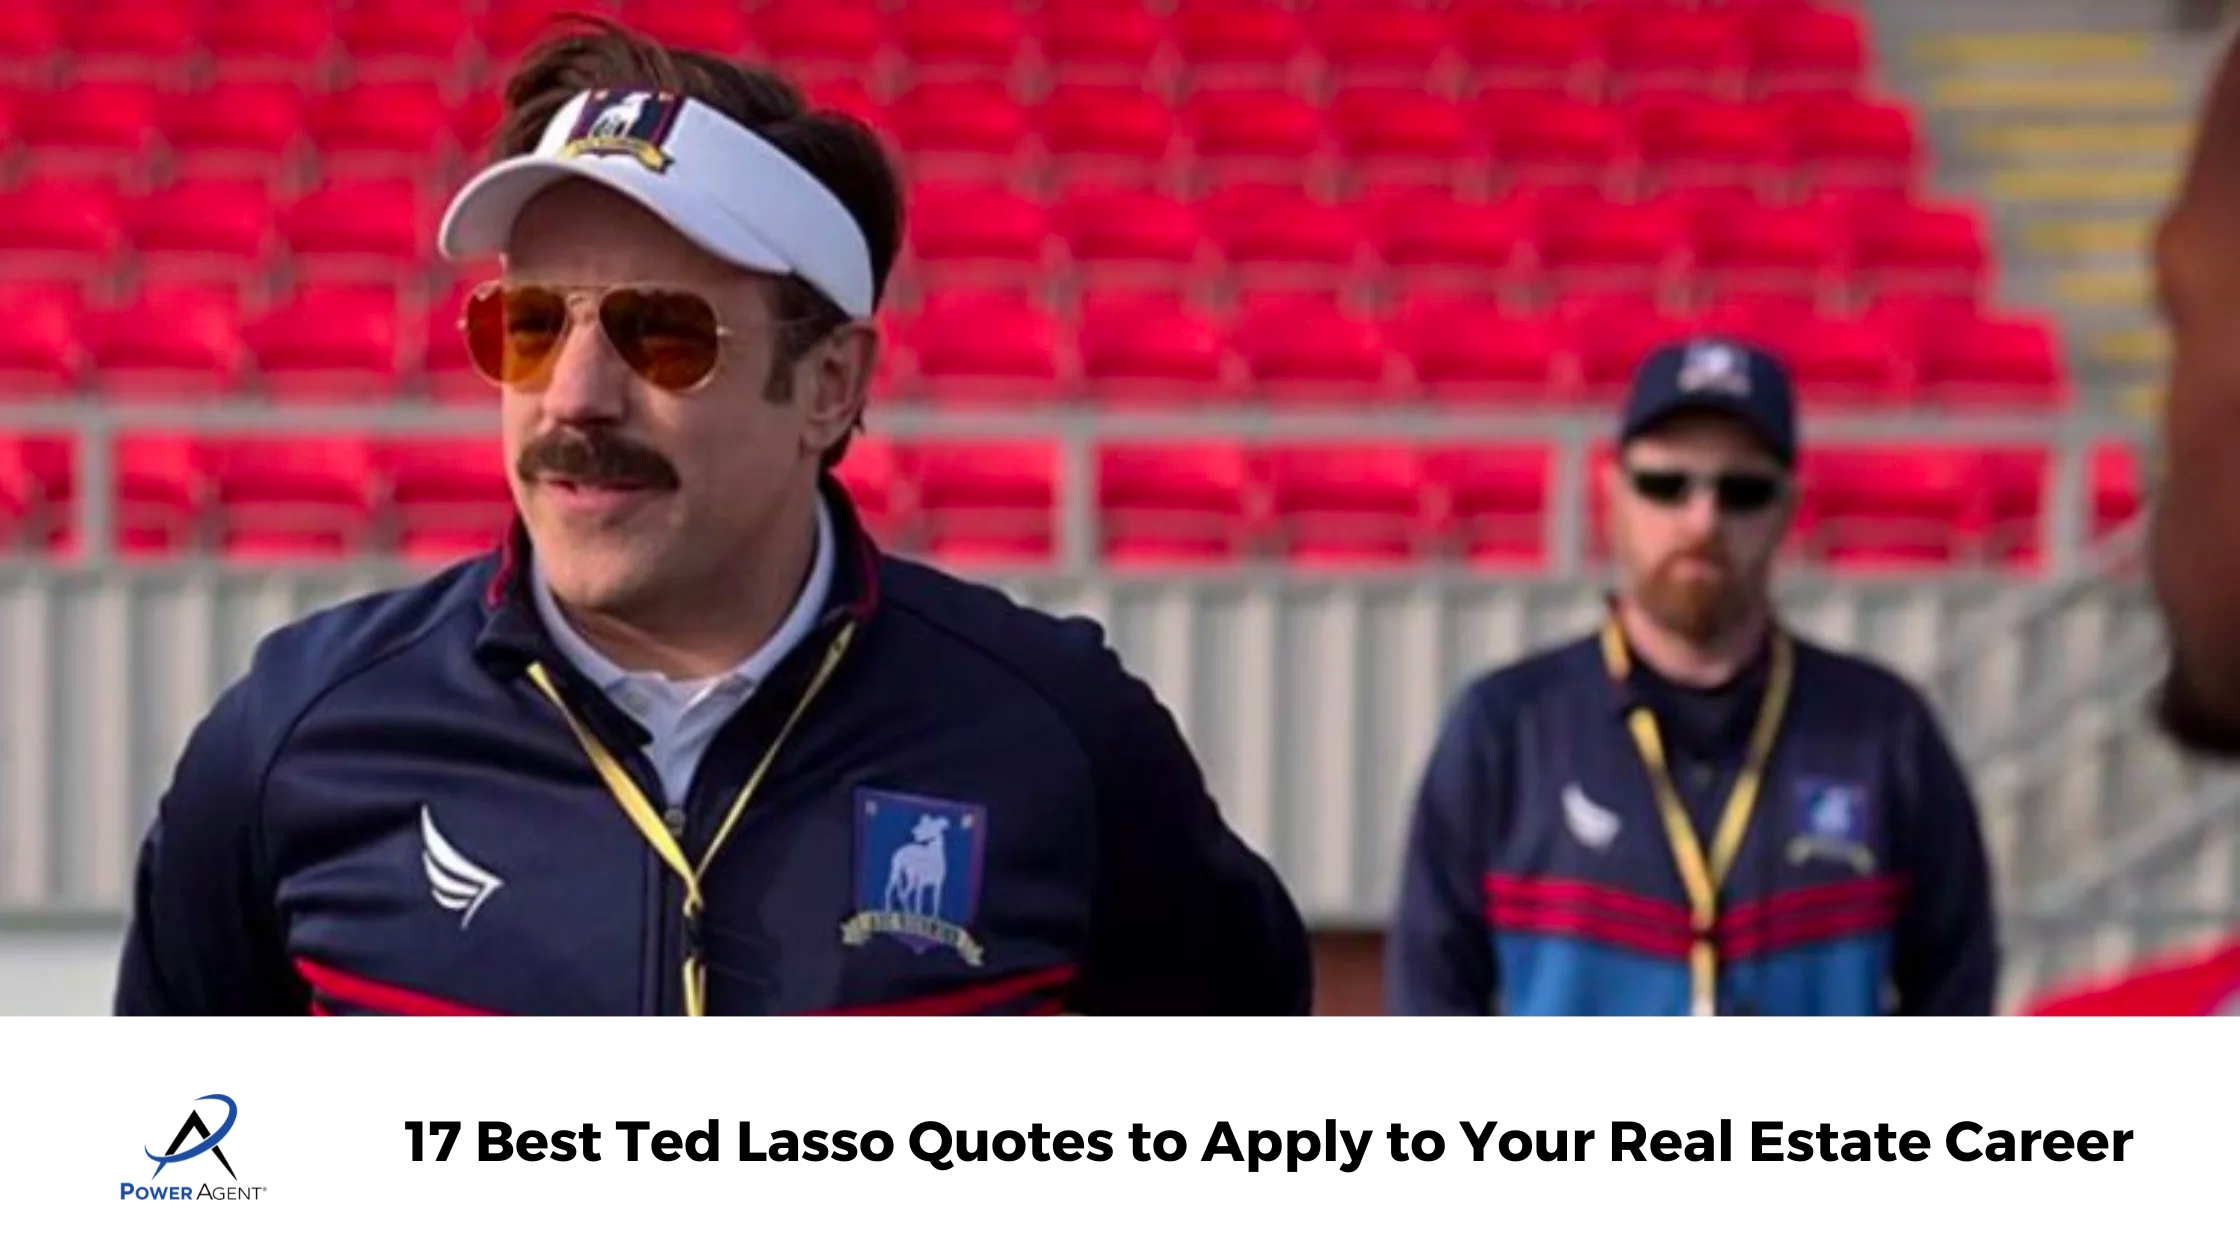 17 Best Ted Lasso Quotes to Apply to Your Real Estate Career